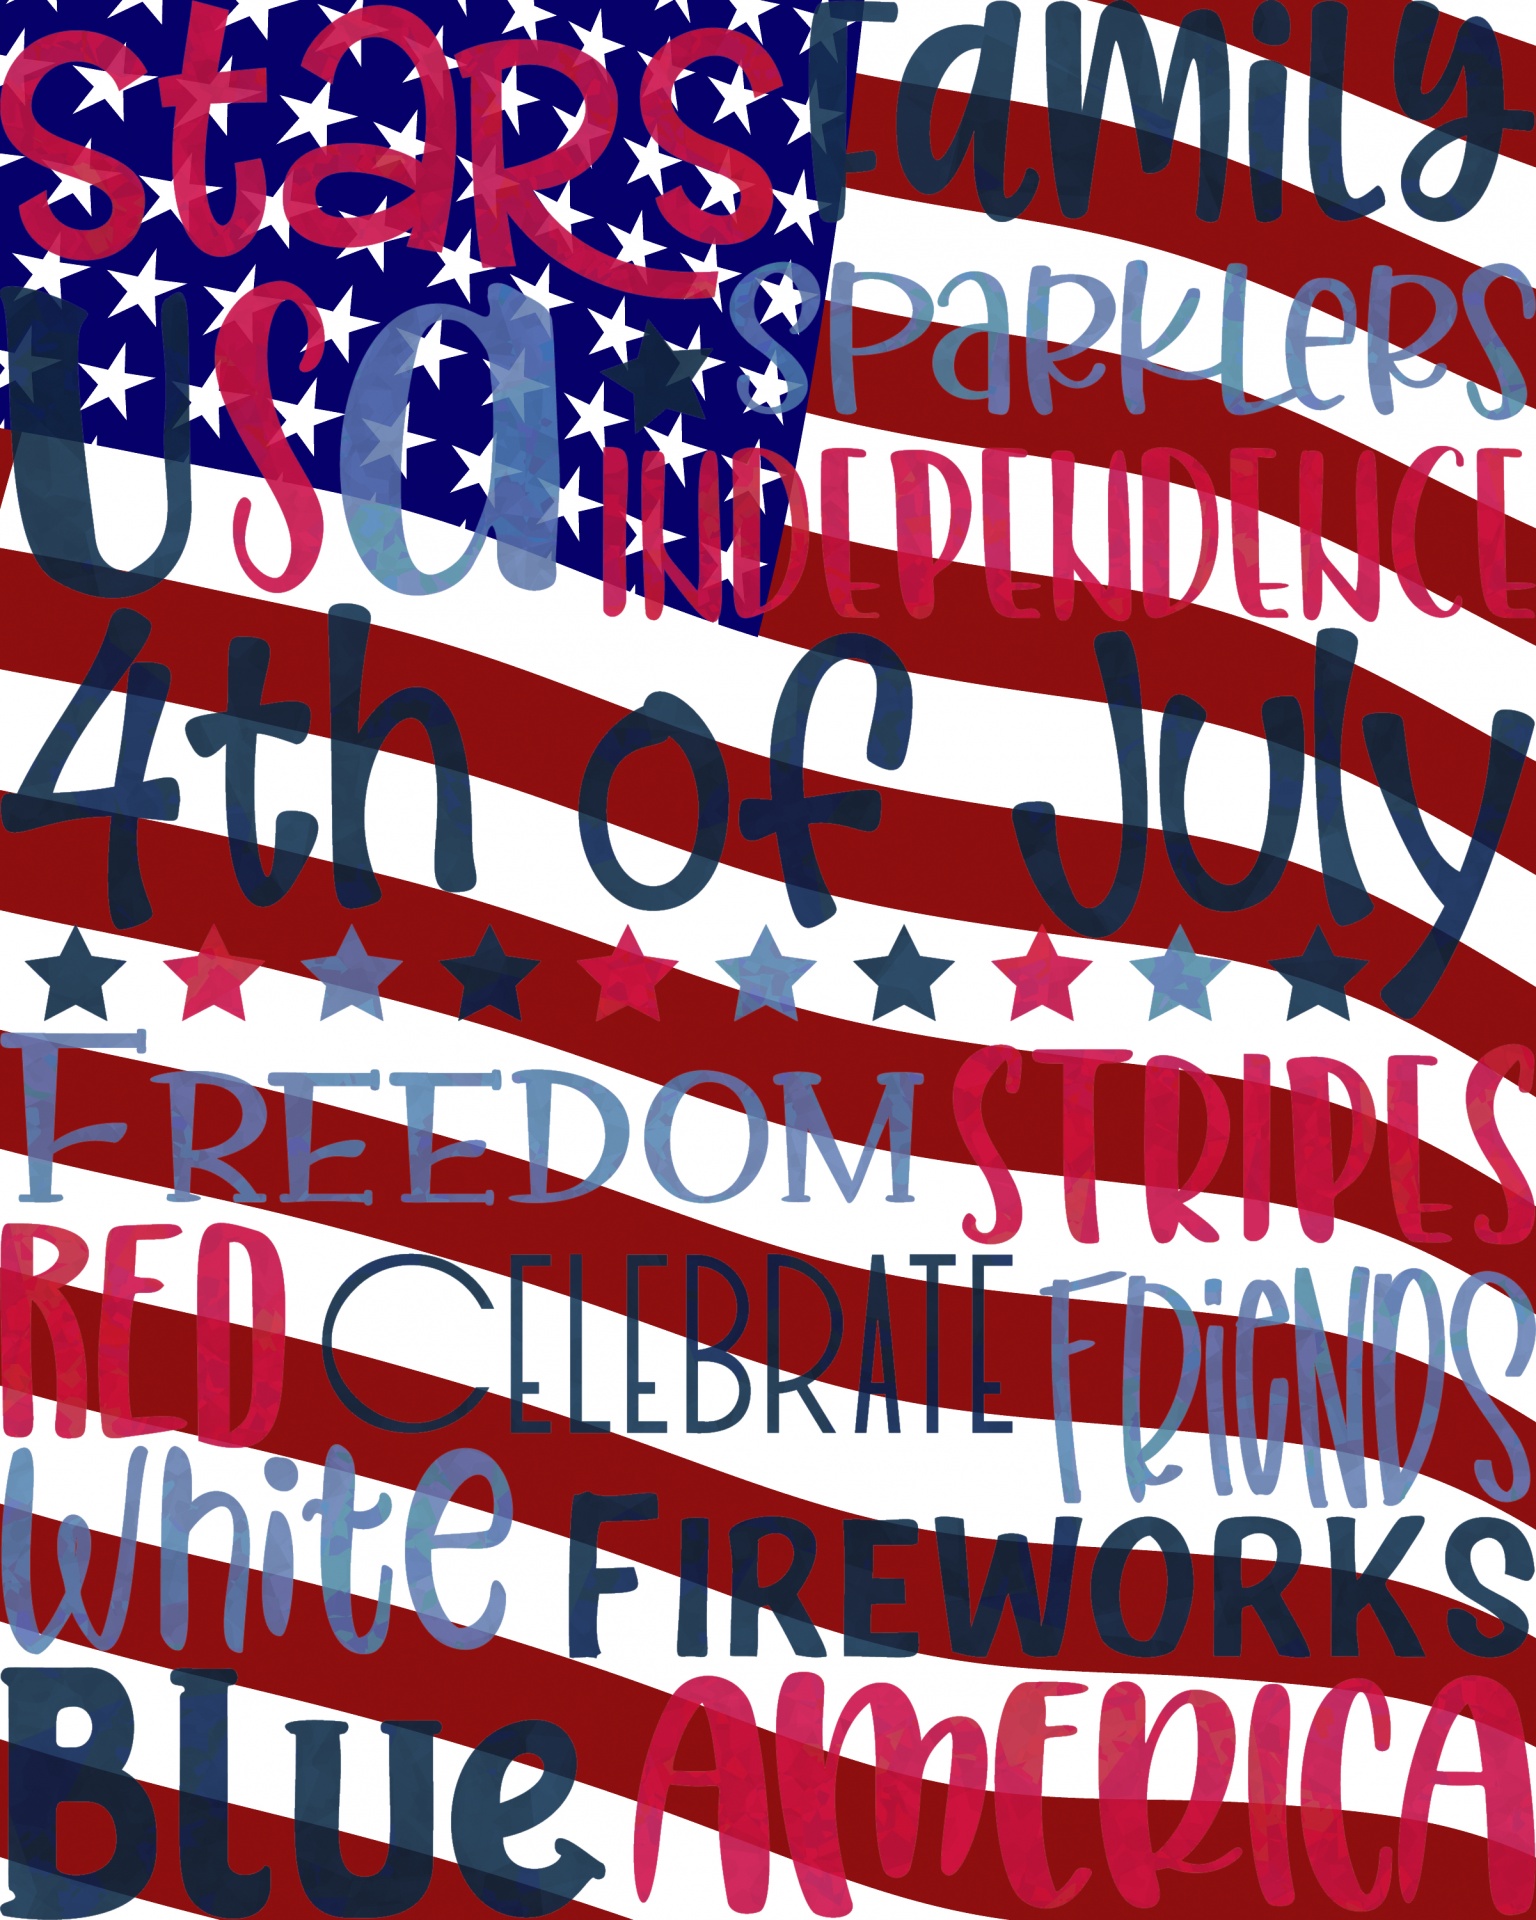 America 4th Of July Flag Poster